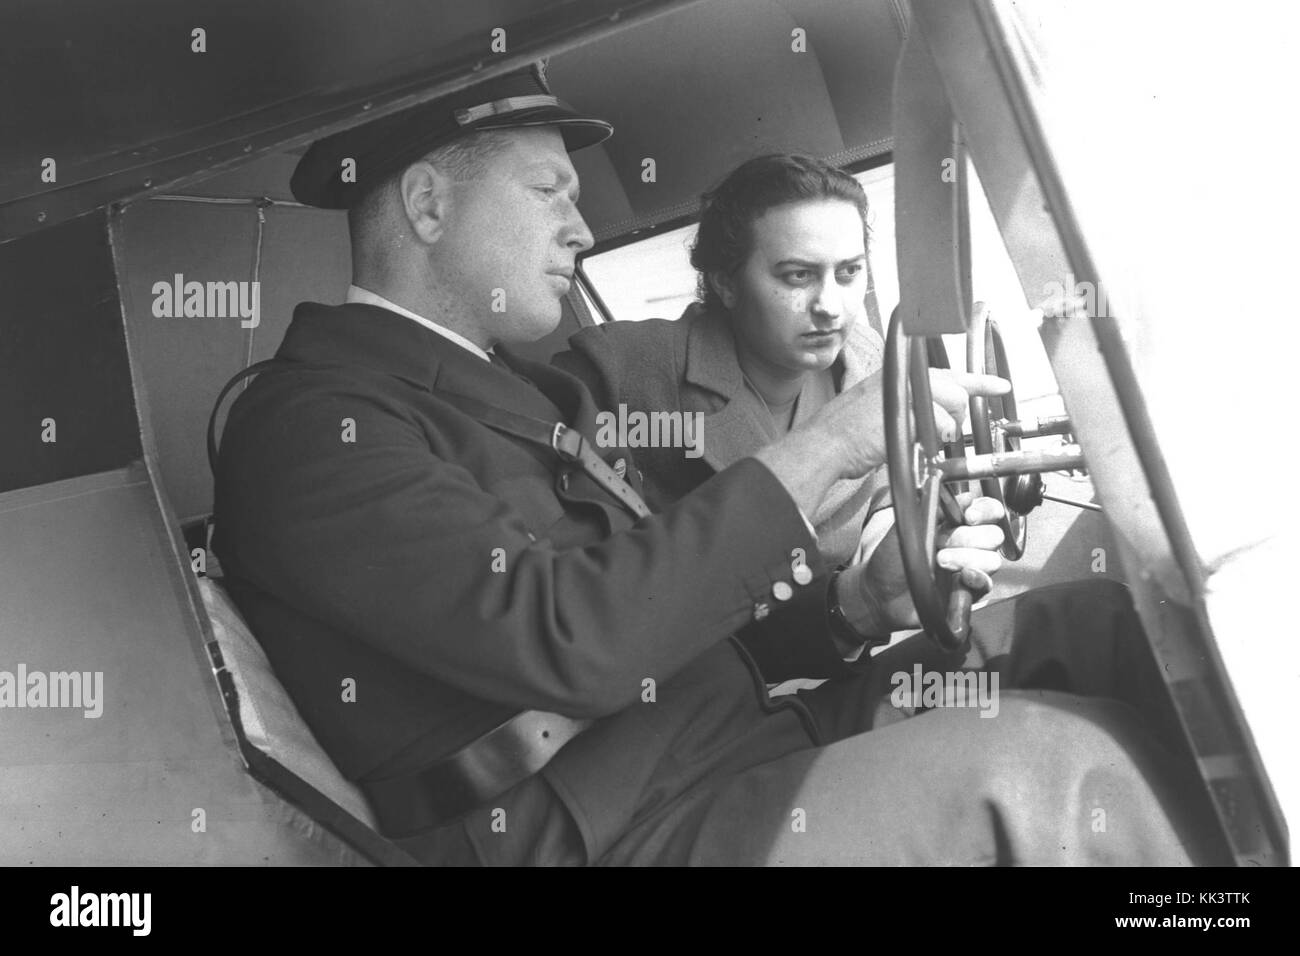 FLYING INSTRUCTOR FREDDY KATZ WITH A TRAINEE IN THE COCKPIT OF ONE OF THE TRAINING PLANES AT THE KATZ (PALESTINE FLYING SERVICE) FLYING SCHOOL IN LOD.D2 059 Stock Photo